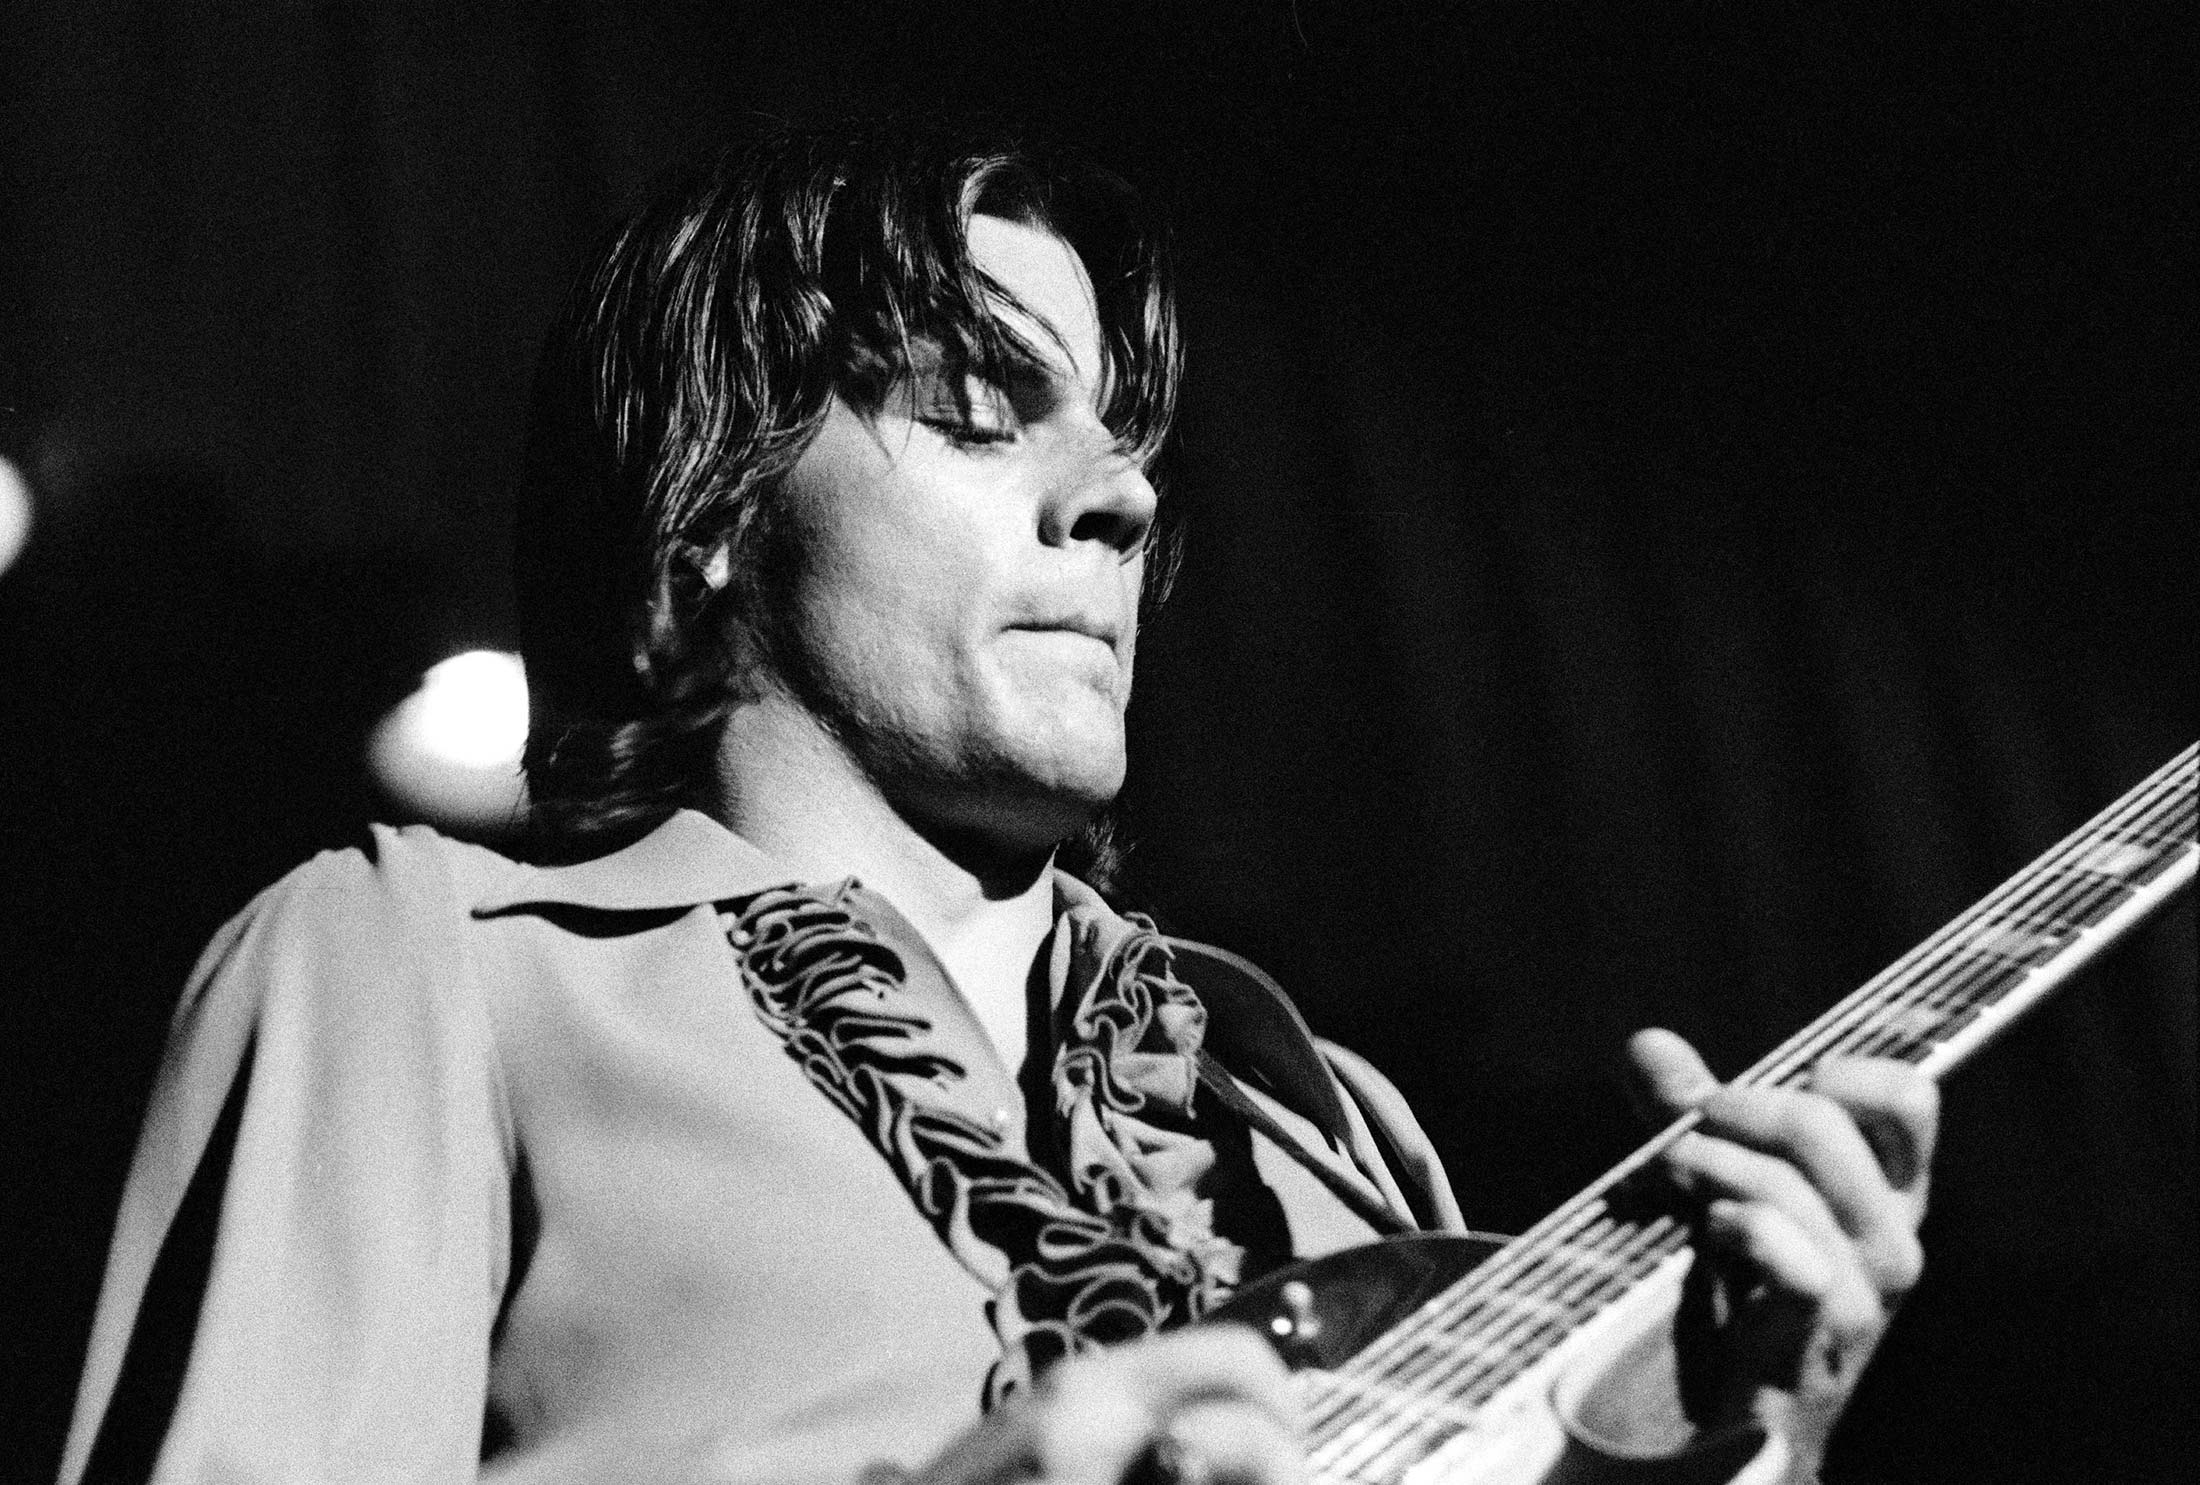 Guitarist J Geils Who Sang Centerfold Dies At Age 71 Bloomberg